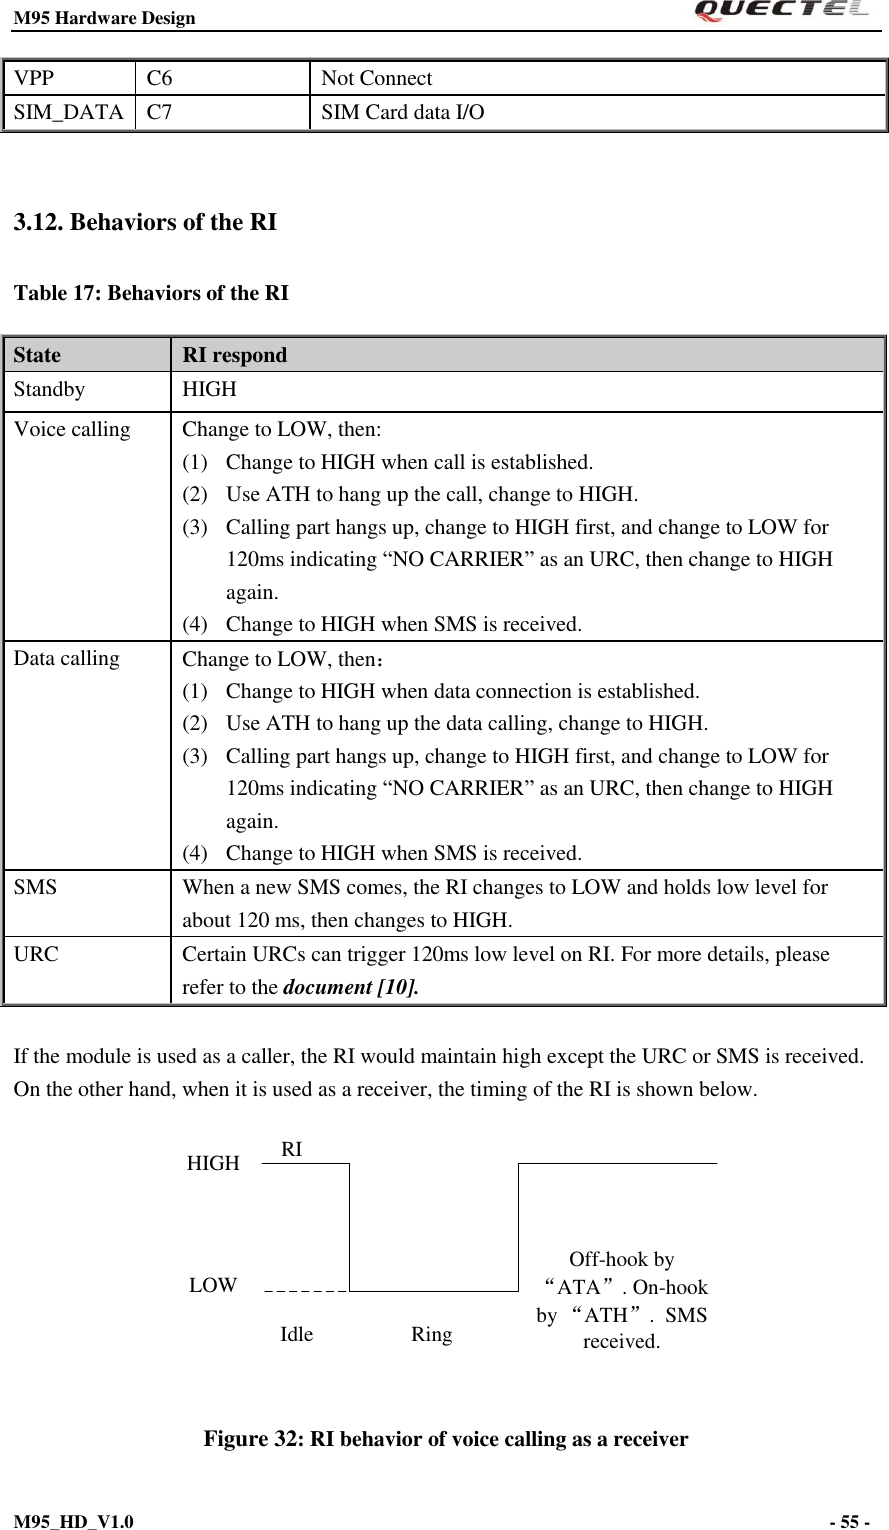 M95 Hardware Design                                                       M95_HD_V1.0                                                                - 55 -    VPP C6 Not Connect SIM_DATA C7 SIM Card data I/O  3.12. Behaviors of the RI   Table 17: Behaviors of the RI   State RI respond Standby HIGH Voice calling Change to LOW, then: (1)   Change to HIGH when call is established. (2)  Use ATH to hang up the call, change to HIGH. (3)  Calling part hangs up, change to HIGH first, and change to LOW for   120ms indicating “NO CARRIER” as an URC, then change to HIGH   again. (4)  Change to HIGH when SMS is received. Data calling Change to LOW, then： (1)   Change to HIGH when data connection is established. (2)  Use ATH to hang up the data calling, change to HIGH. (3)  Calling part hangs up, change to HIGH first, and change to LOW for   120ms indicating “NO CARRIER” as an URC, then change to HIGH   again. (4)  Change to HIGH when SMS is received. SMS When a new SMS comes, the RI changes to LOW and holds low level for about 120 ms, then changes to HIGH. URC Certain URCs can trigger 120ms low level on RI. For more details, please refer to the document [10].  If the module is used as a caller, the RI would maintain high except the URC or SMS is received. On the other hand, when it is used as a receiver, the timing of the RI is shown below.   RIIdle RingOff-hook by “ATA”. On-hook by “ATH”.  SMS received. HIGHLOW Figure 32: RI behavior of voice calling as a receiver 